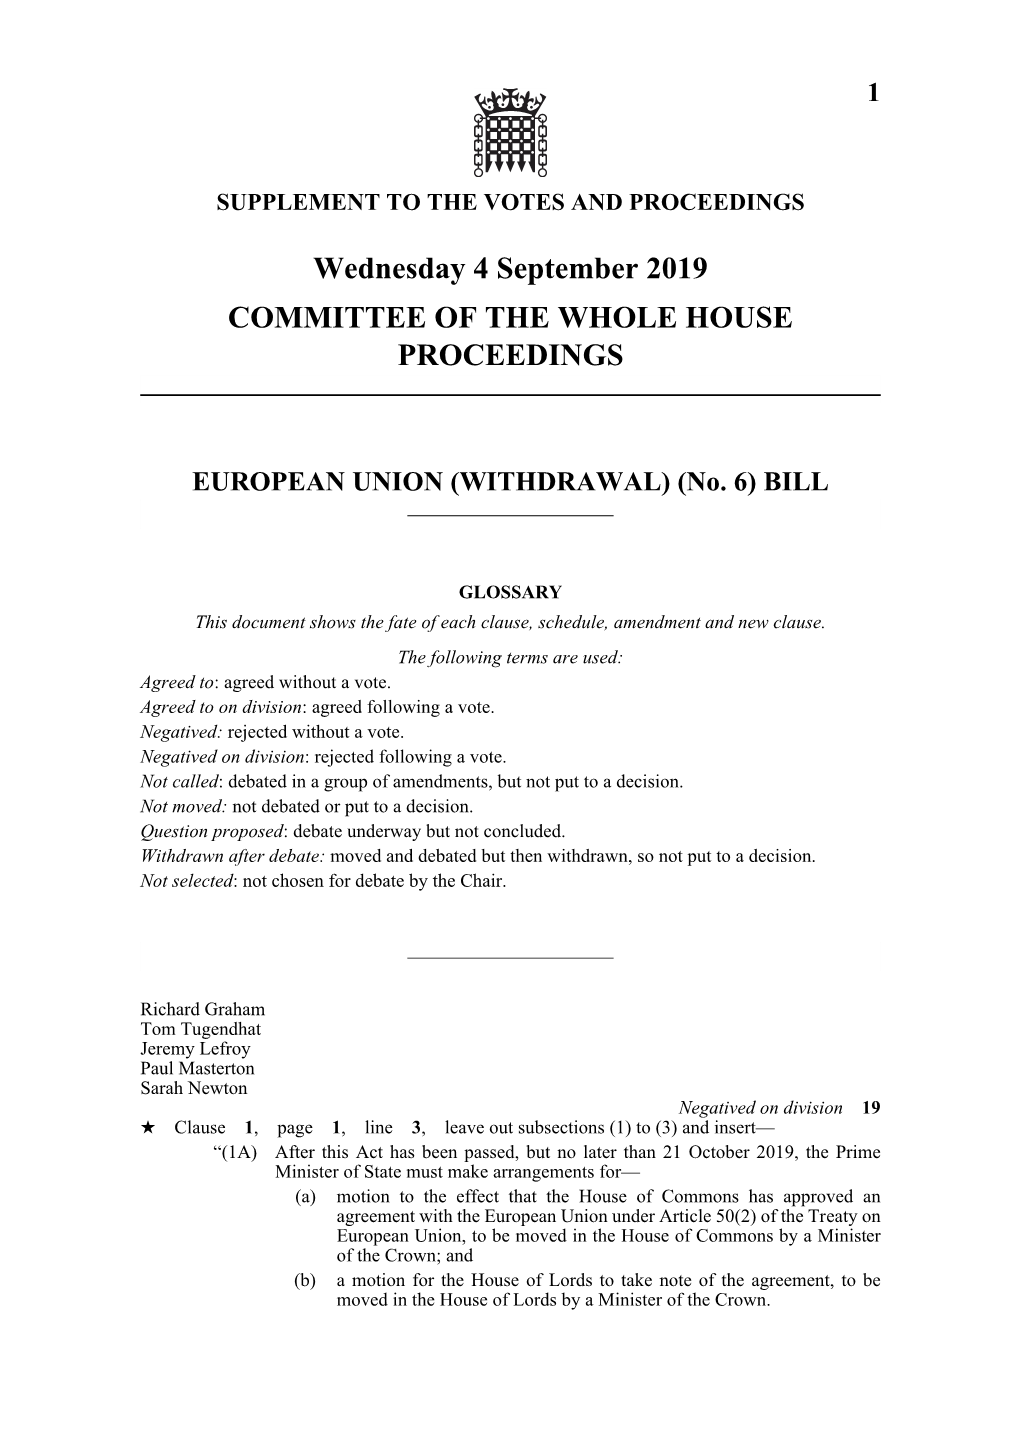 Wednesday 4 September 2019 COMMITTEE of the WHOLE HOUSE PROCEEDINGS